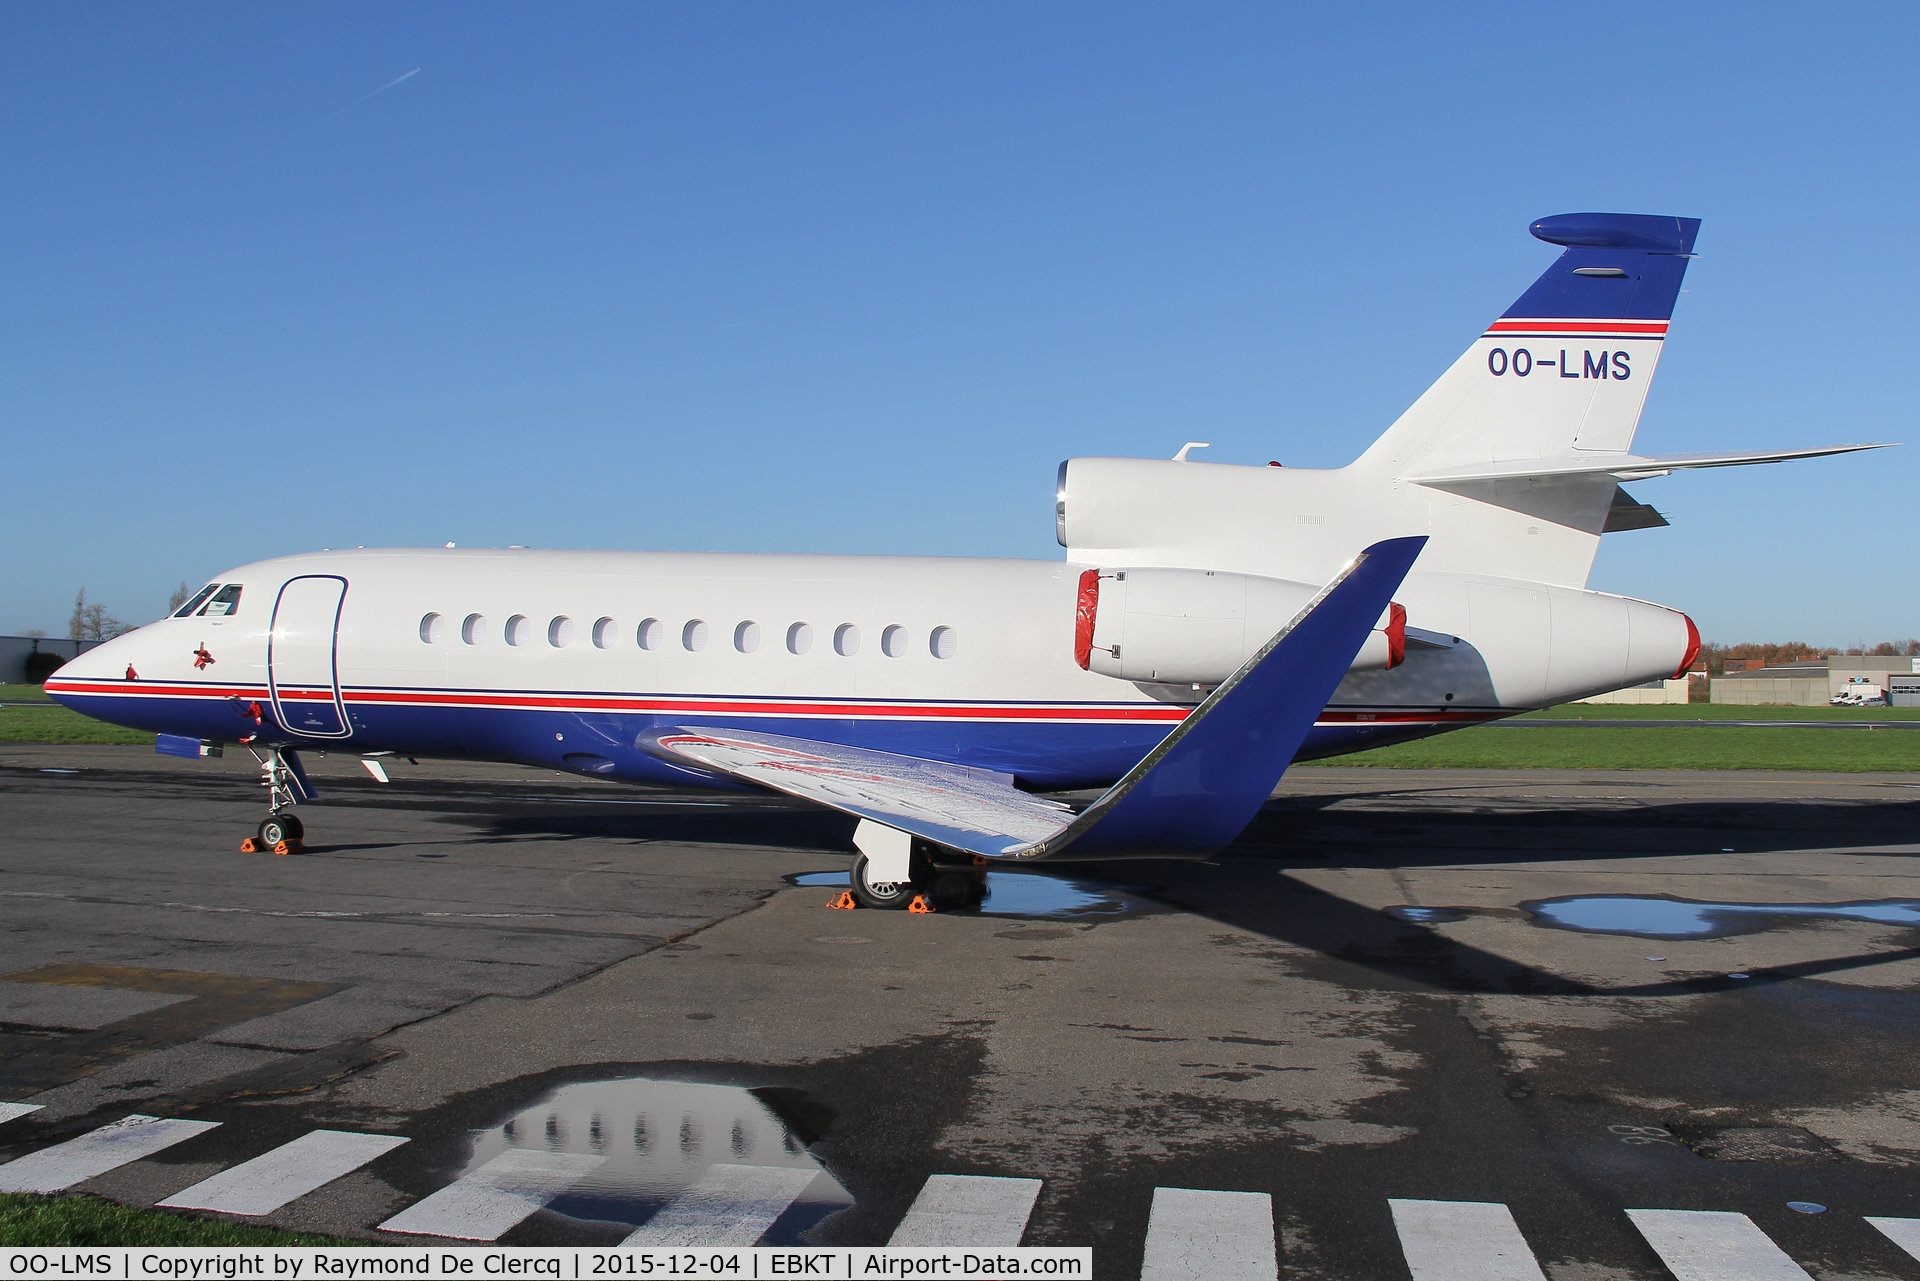 OO-LMS, 2014 Dassault Falcon 900LX C/N 285, Parked at Wevelgem.